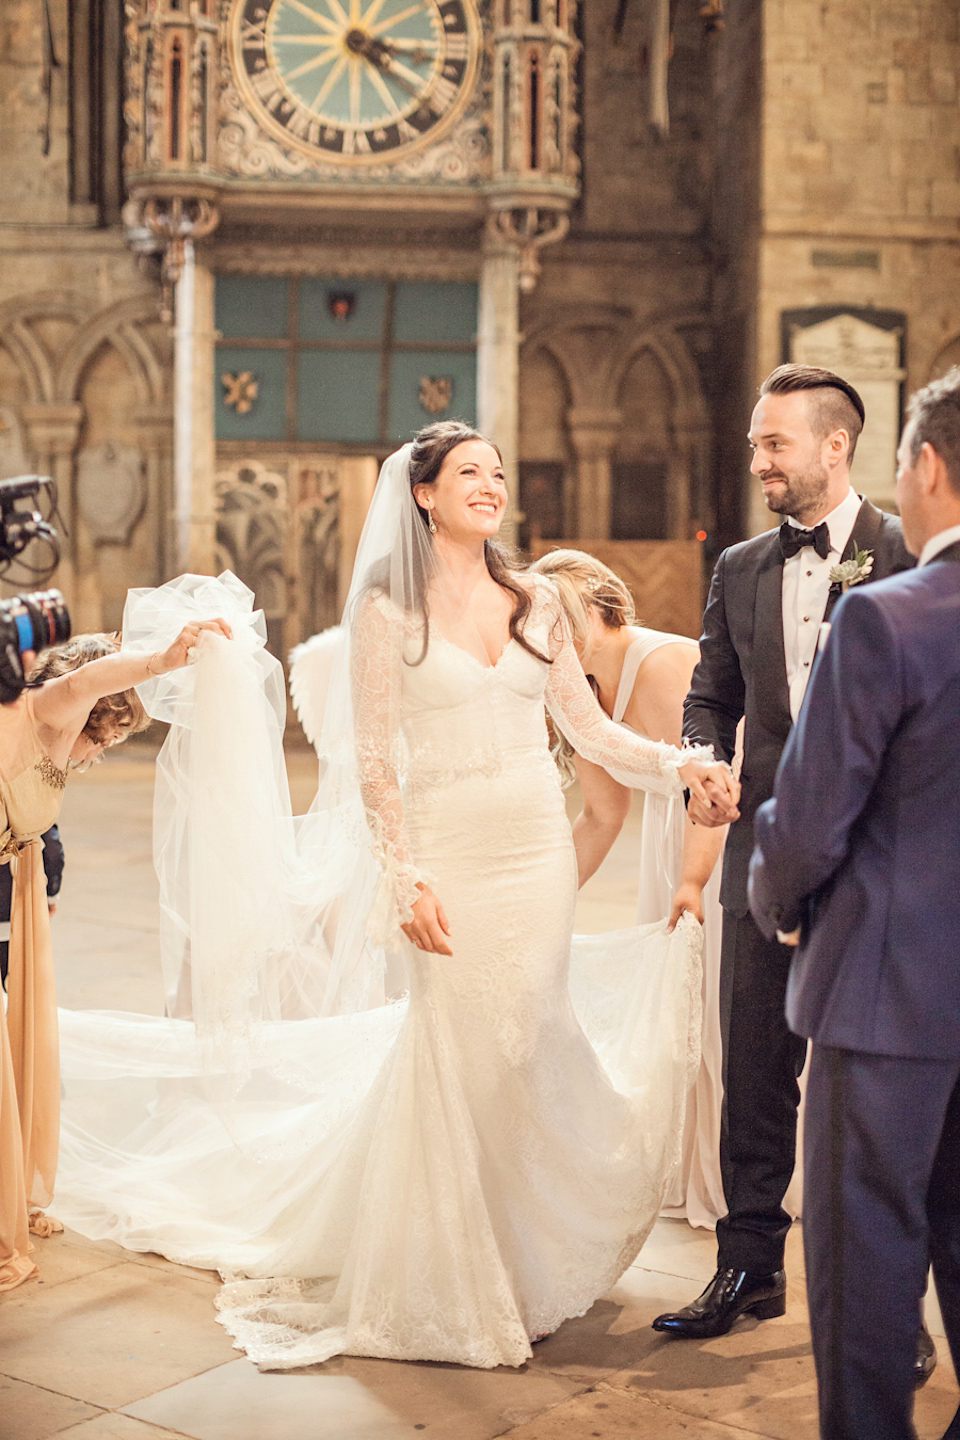 A Galia Lahav gown for glamorous Summer wedding at Durham Cathedral. Photography by Katy Melling.